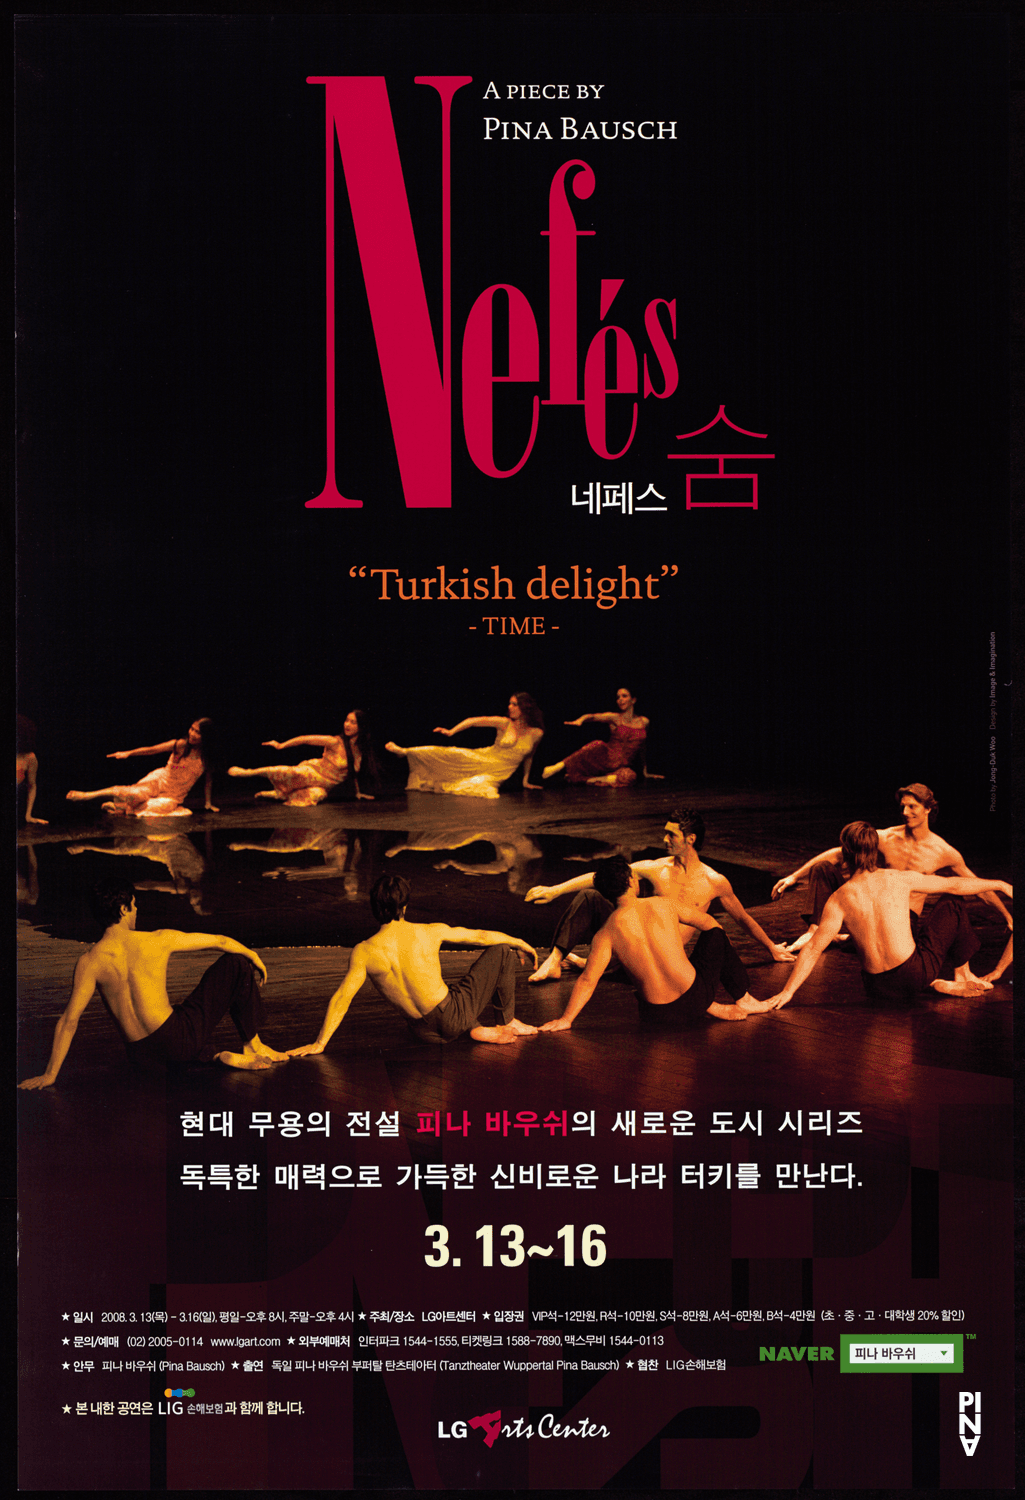 Poster for “Nefés” by Pina Bausch in Seoul, 03/13/2008 – 03/16/2008